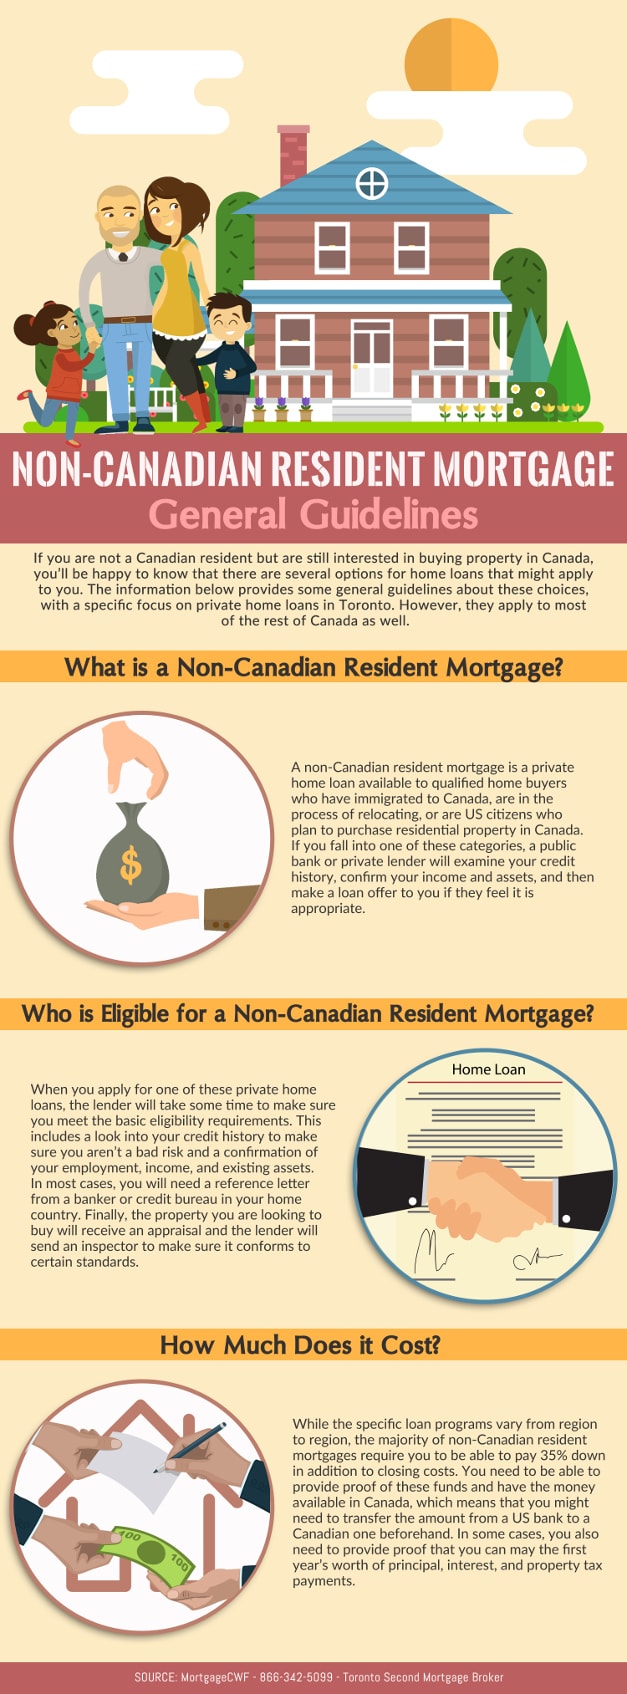 Non-Canadian Resident Mortgage: General Guidelines - Infographic